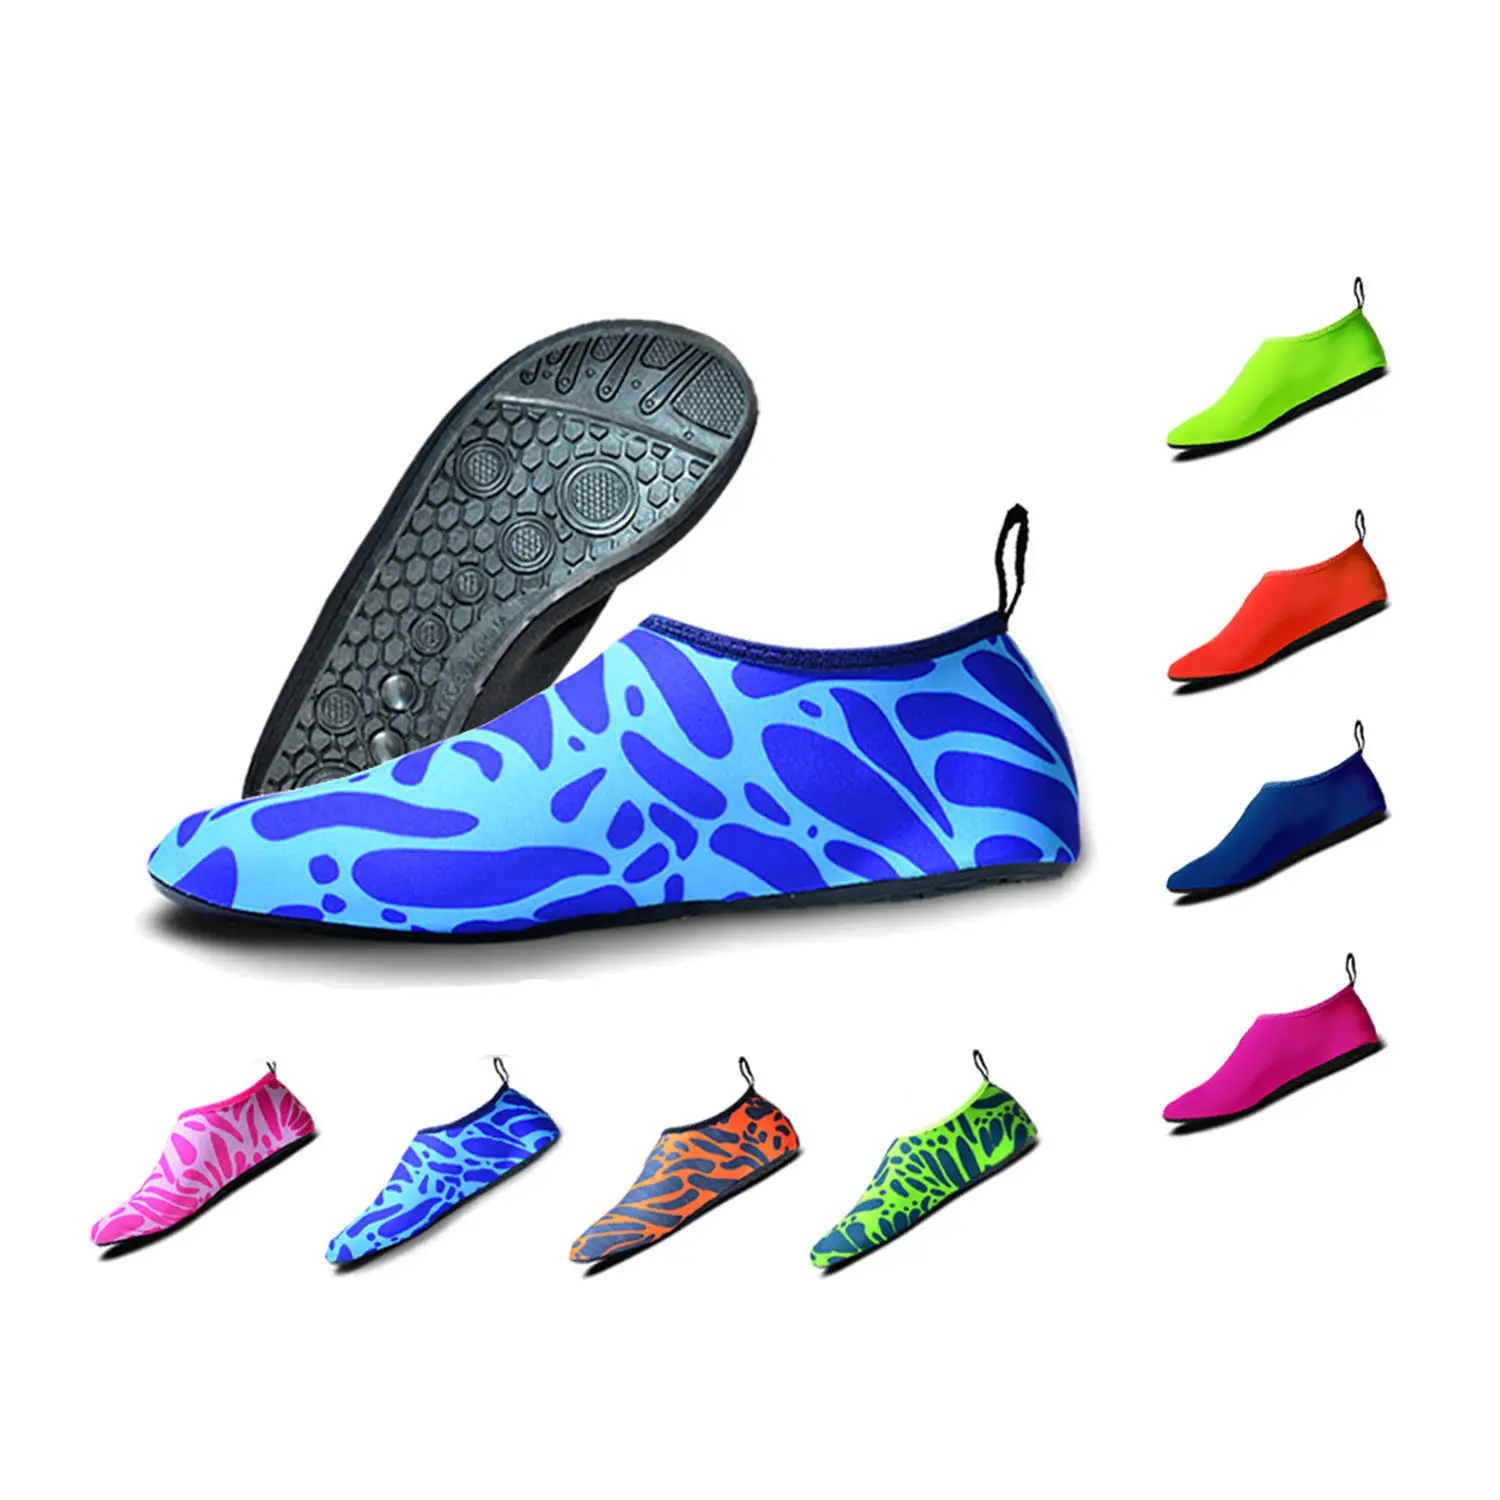 Aqua Shoes Outdoor Beach Swimming Beach Socks Quick-Dry Barefoot Anti Slip water shoes Surfing Yoga Pool Exercise